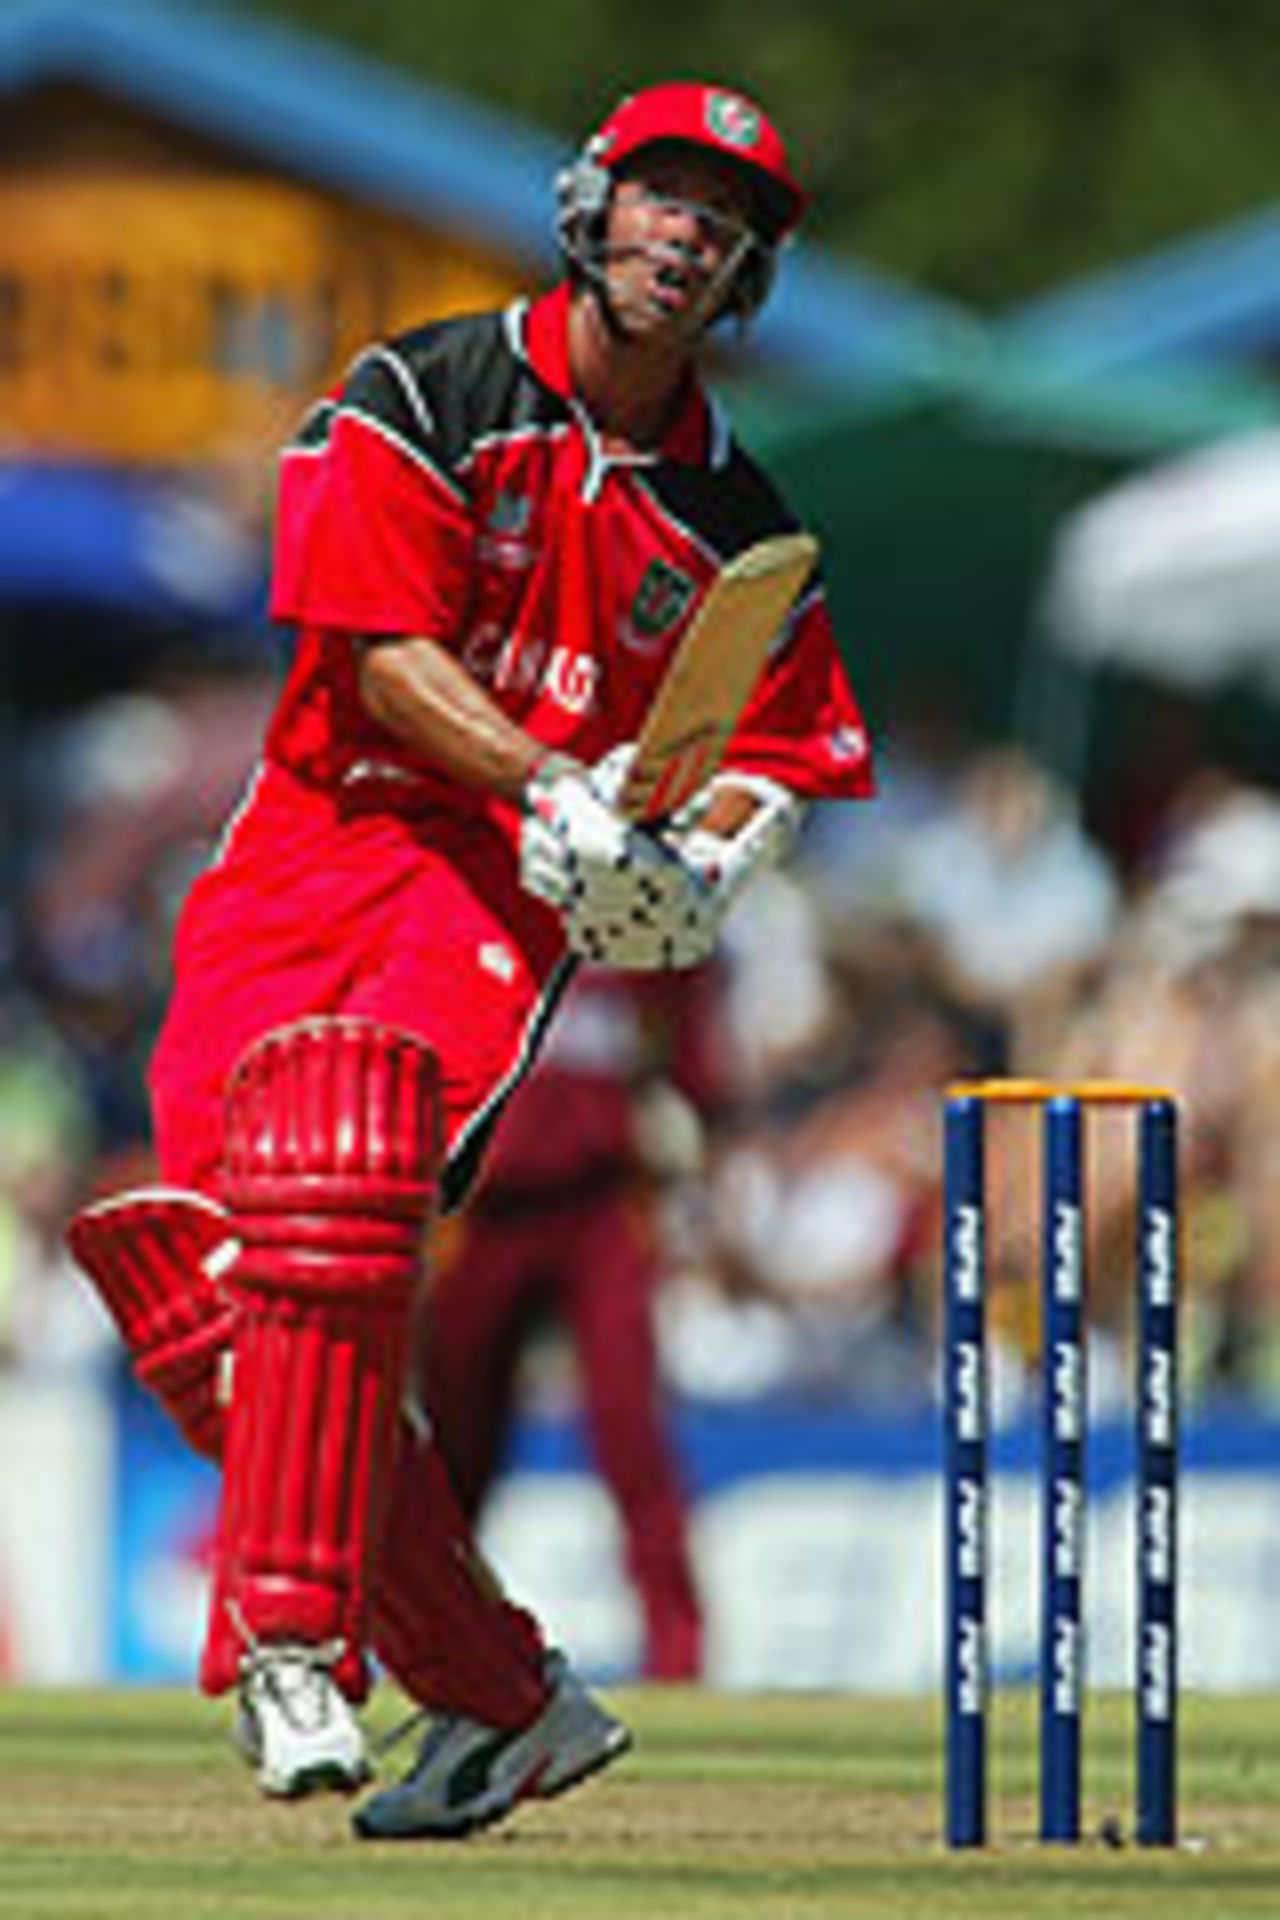 John Davison hooking on his way to a century, Canada v West Indies, World Cup 2003